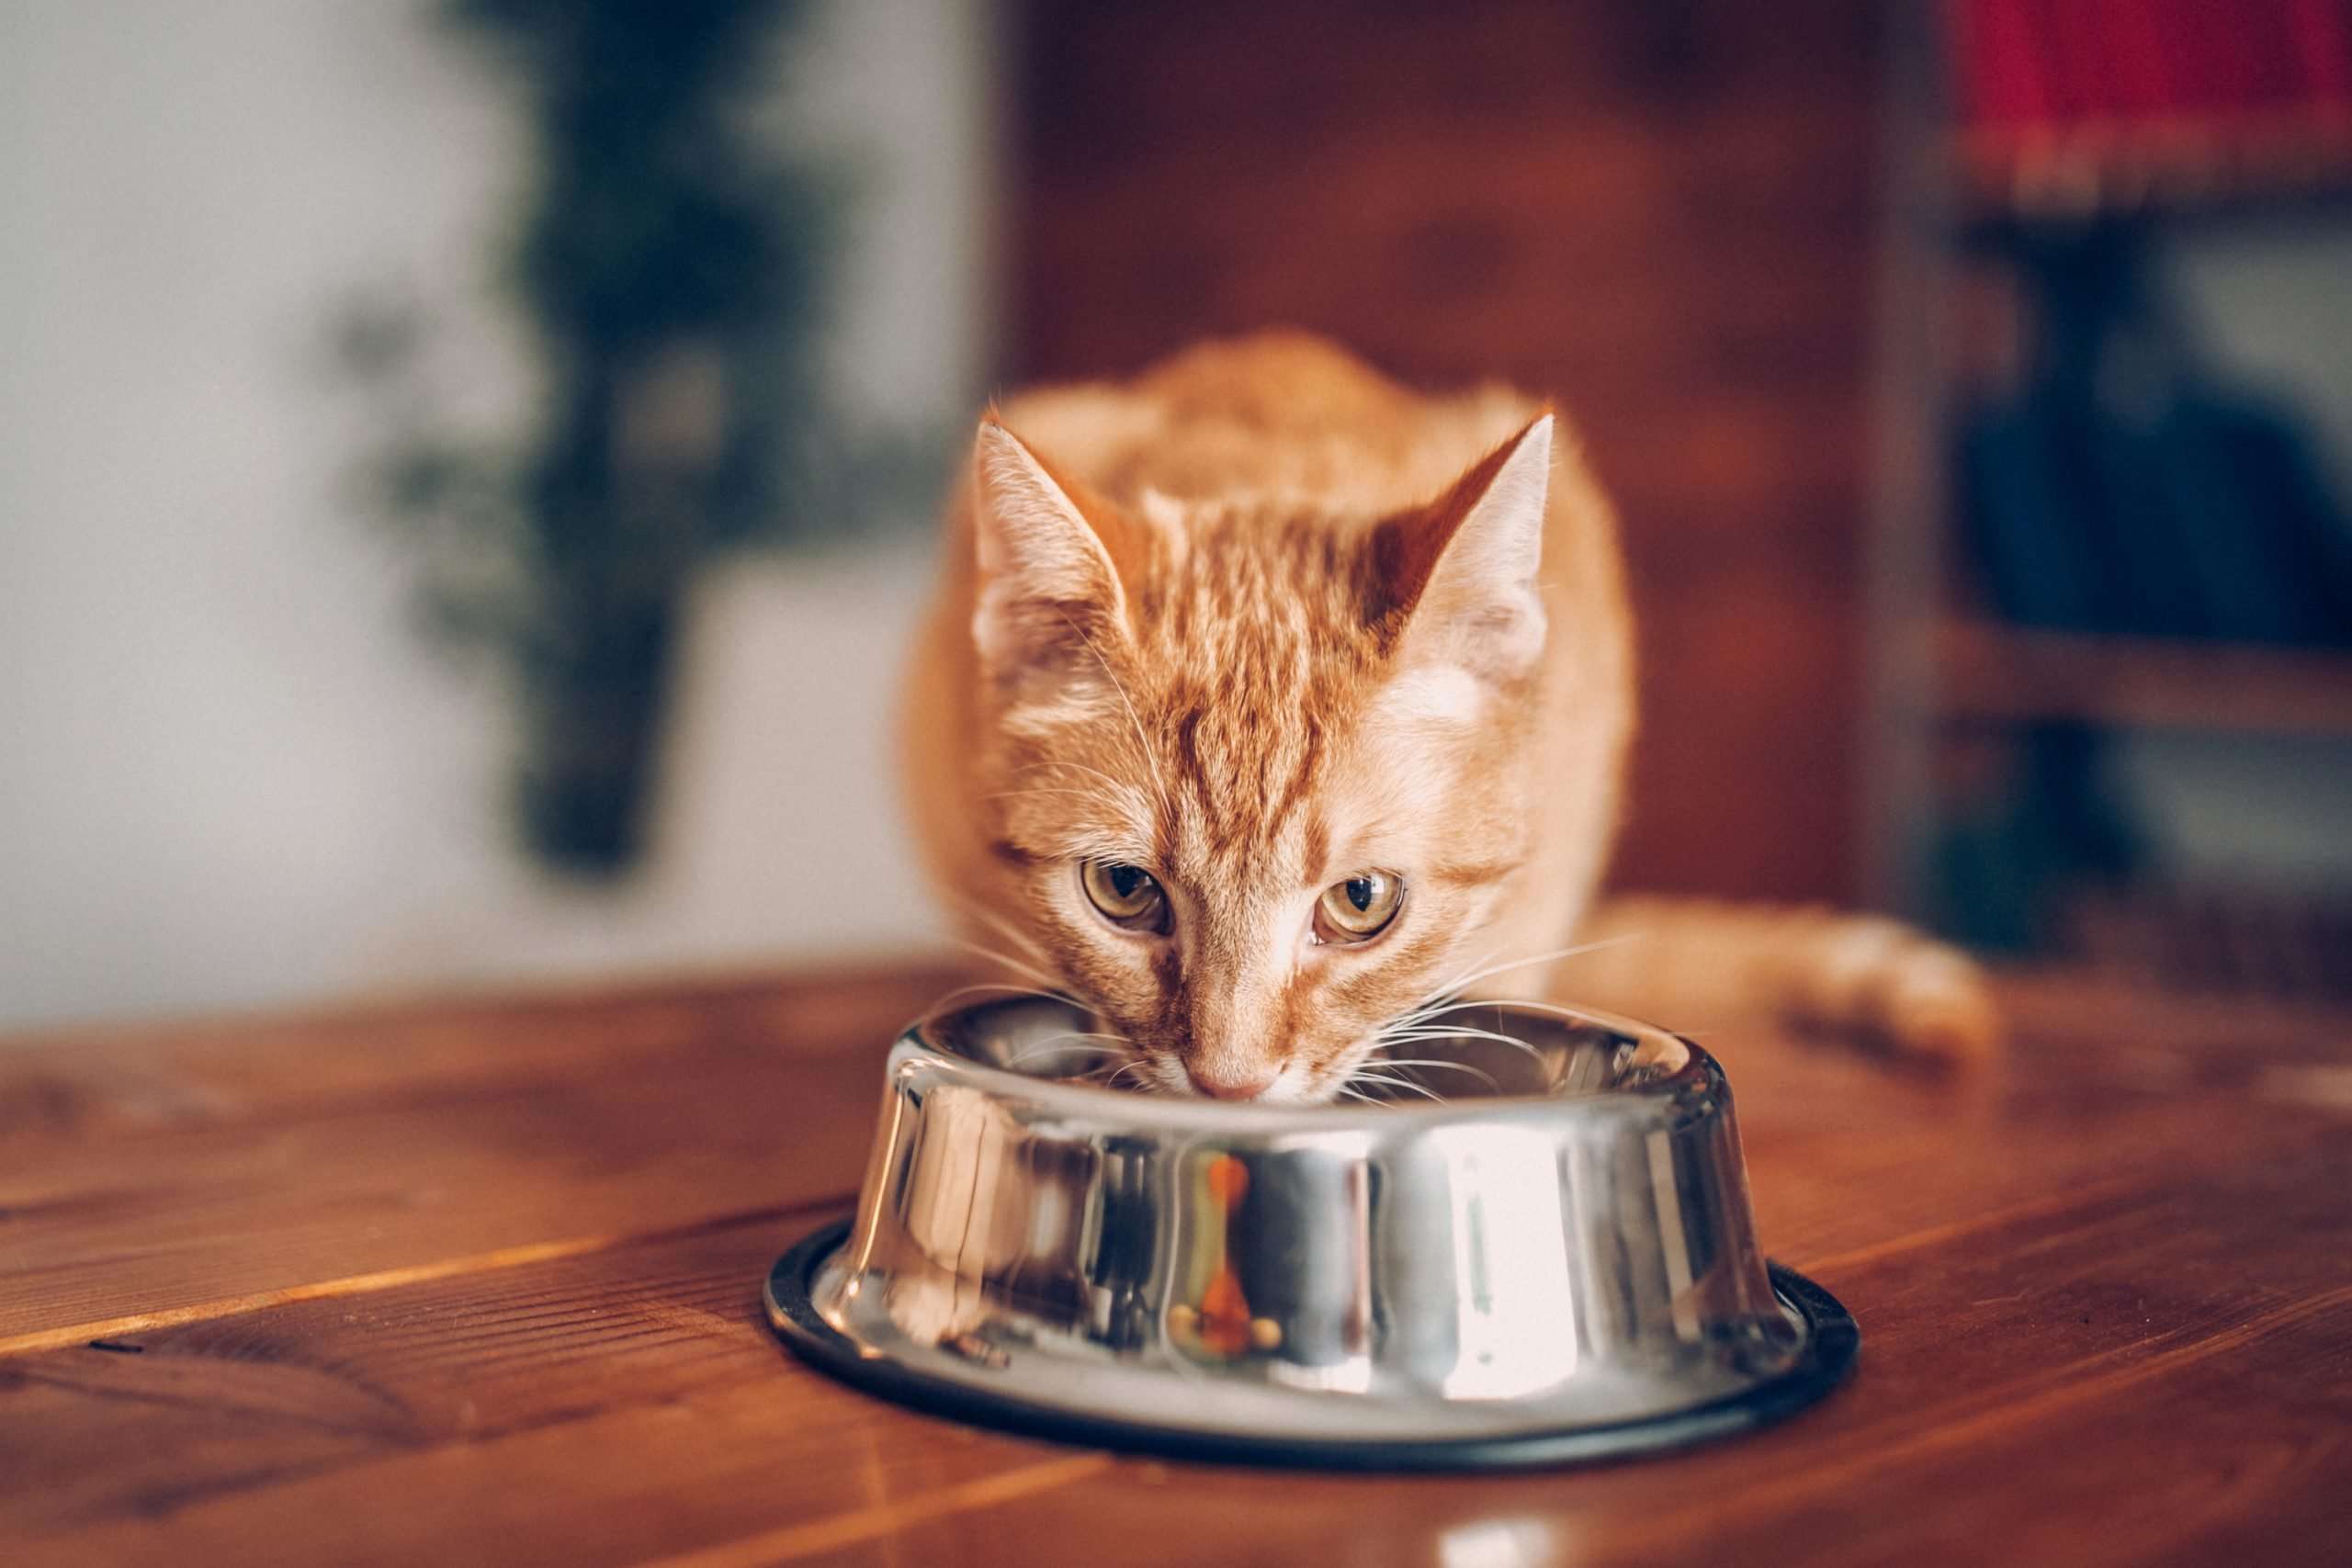 What Are You Feeding Your Cat?